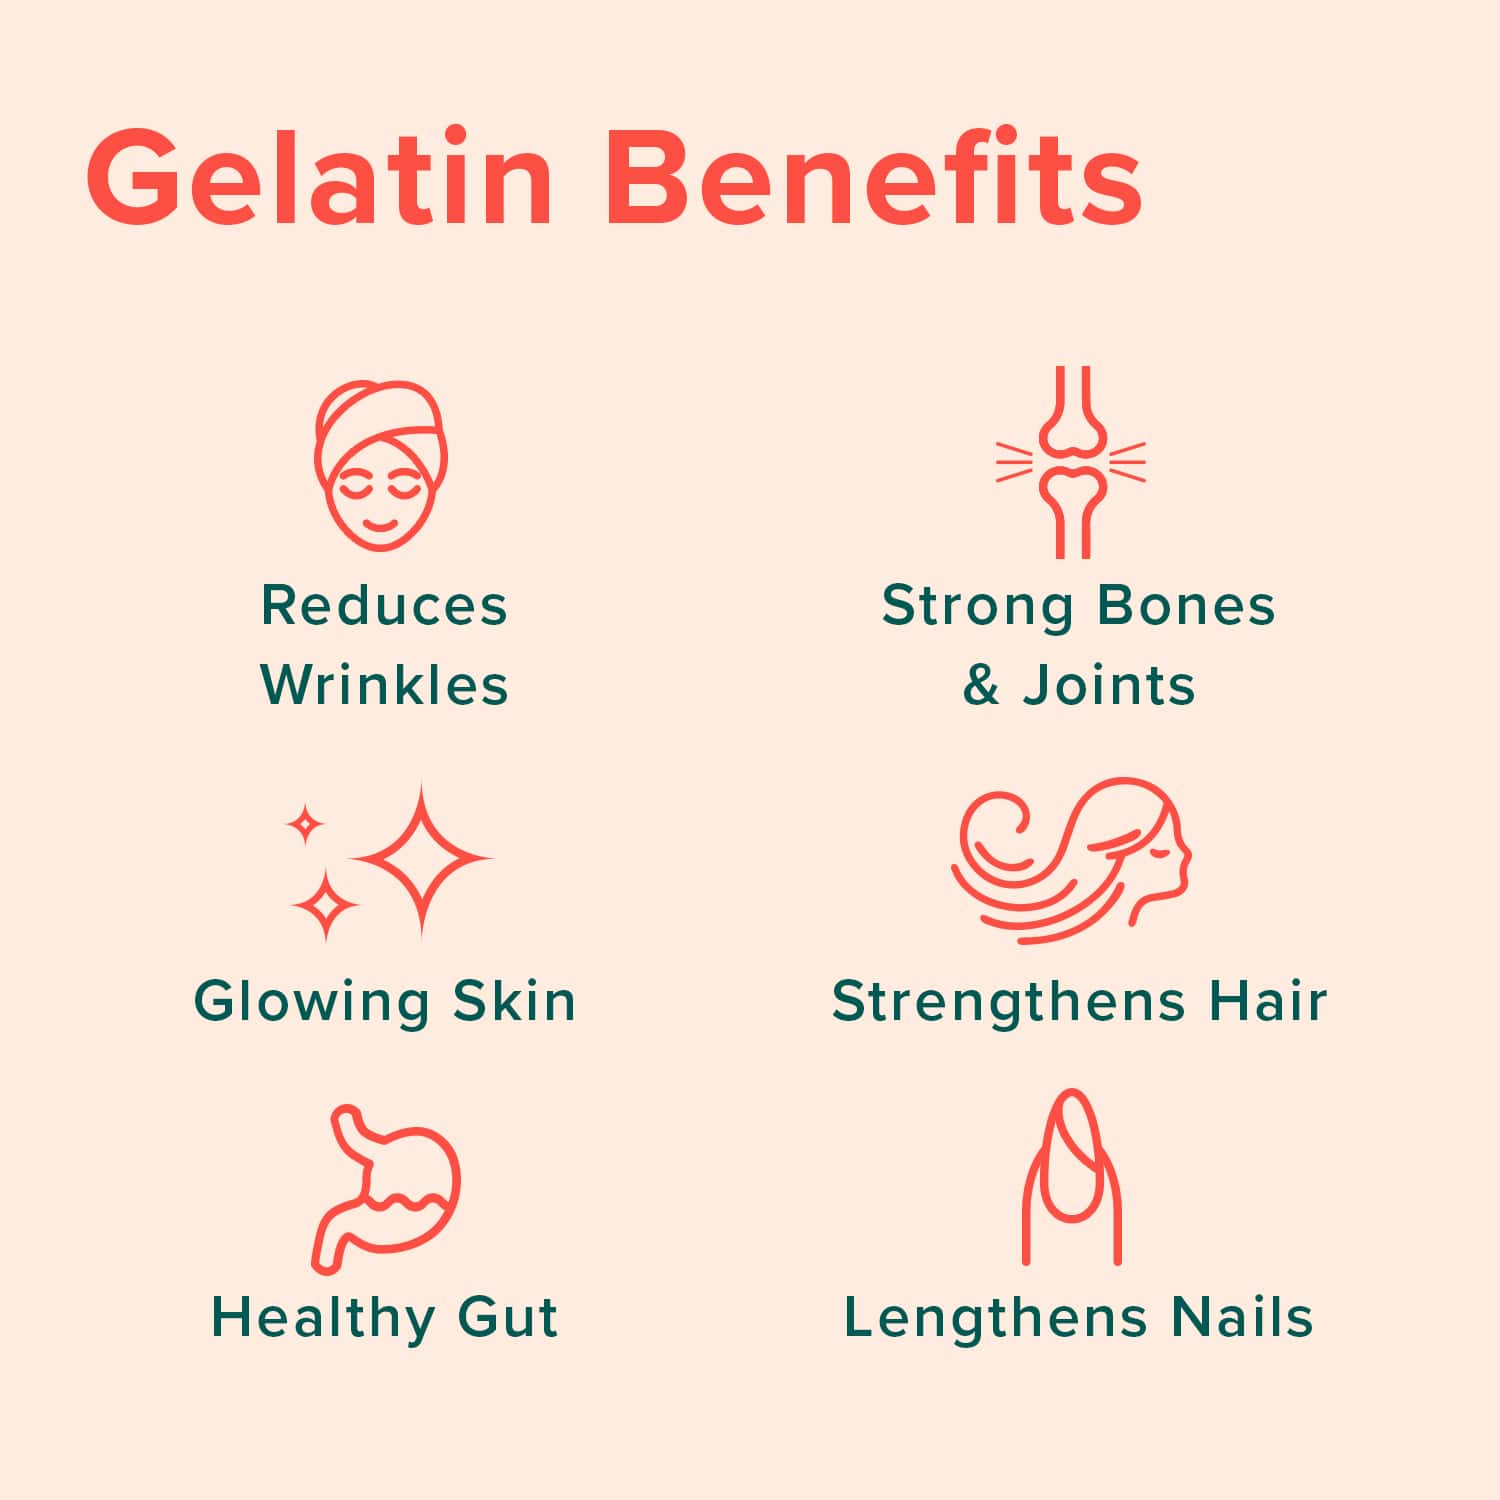 Gelatin Benefits: Reduces Wrinkles, Glowing Skin, Healthy Gut, Strong Bones & Joints, Strengthens Hair and Lengthens Nails